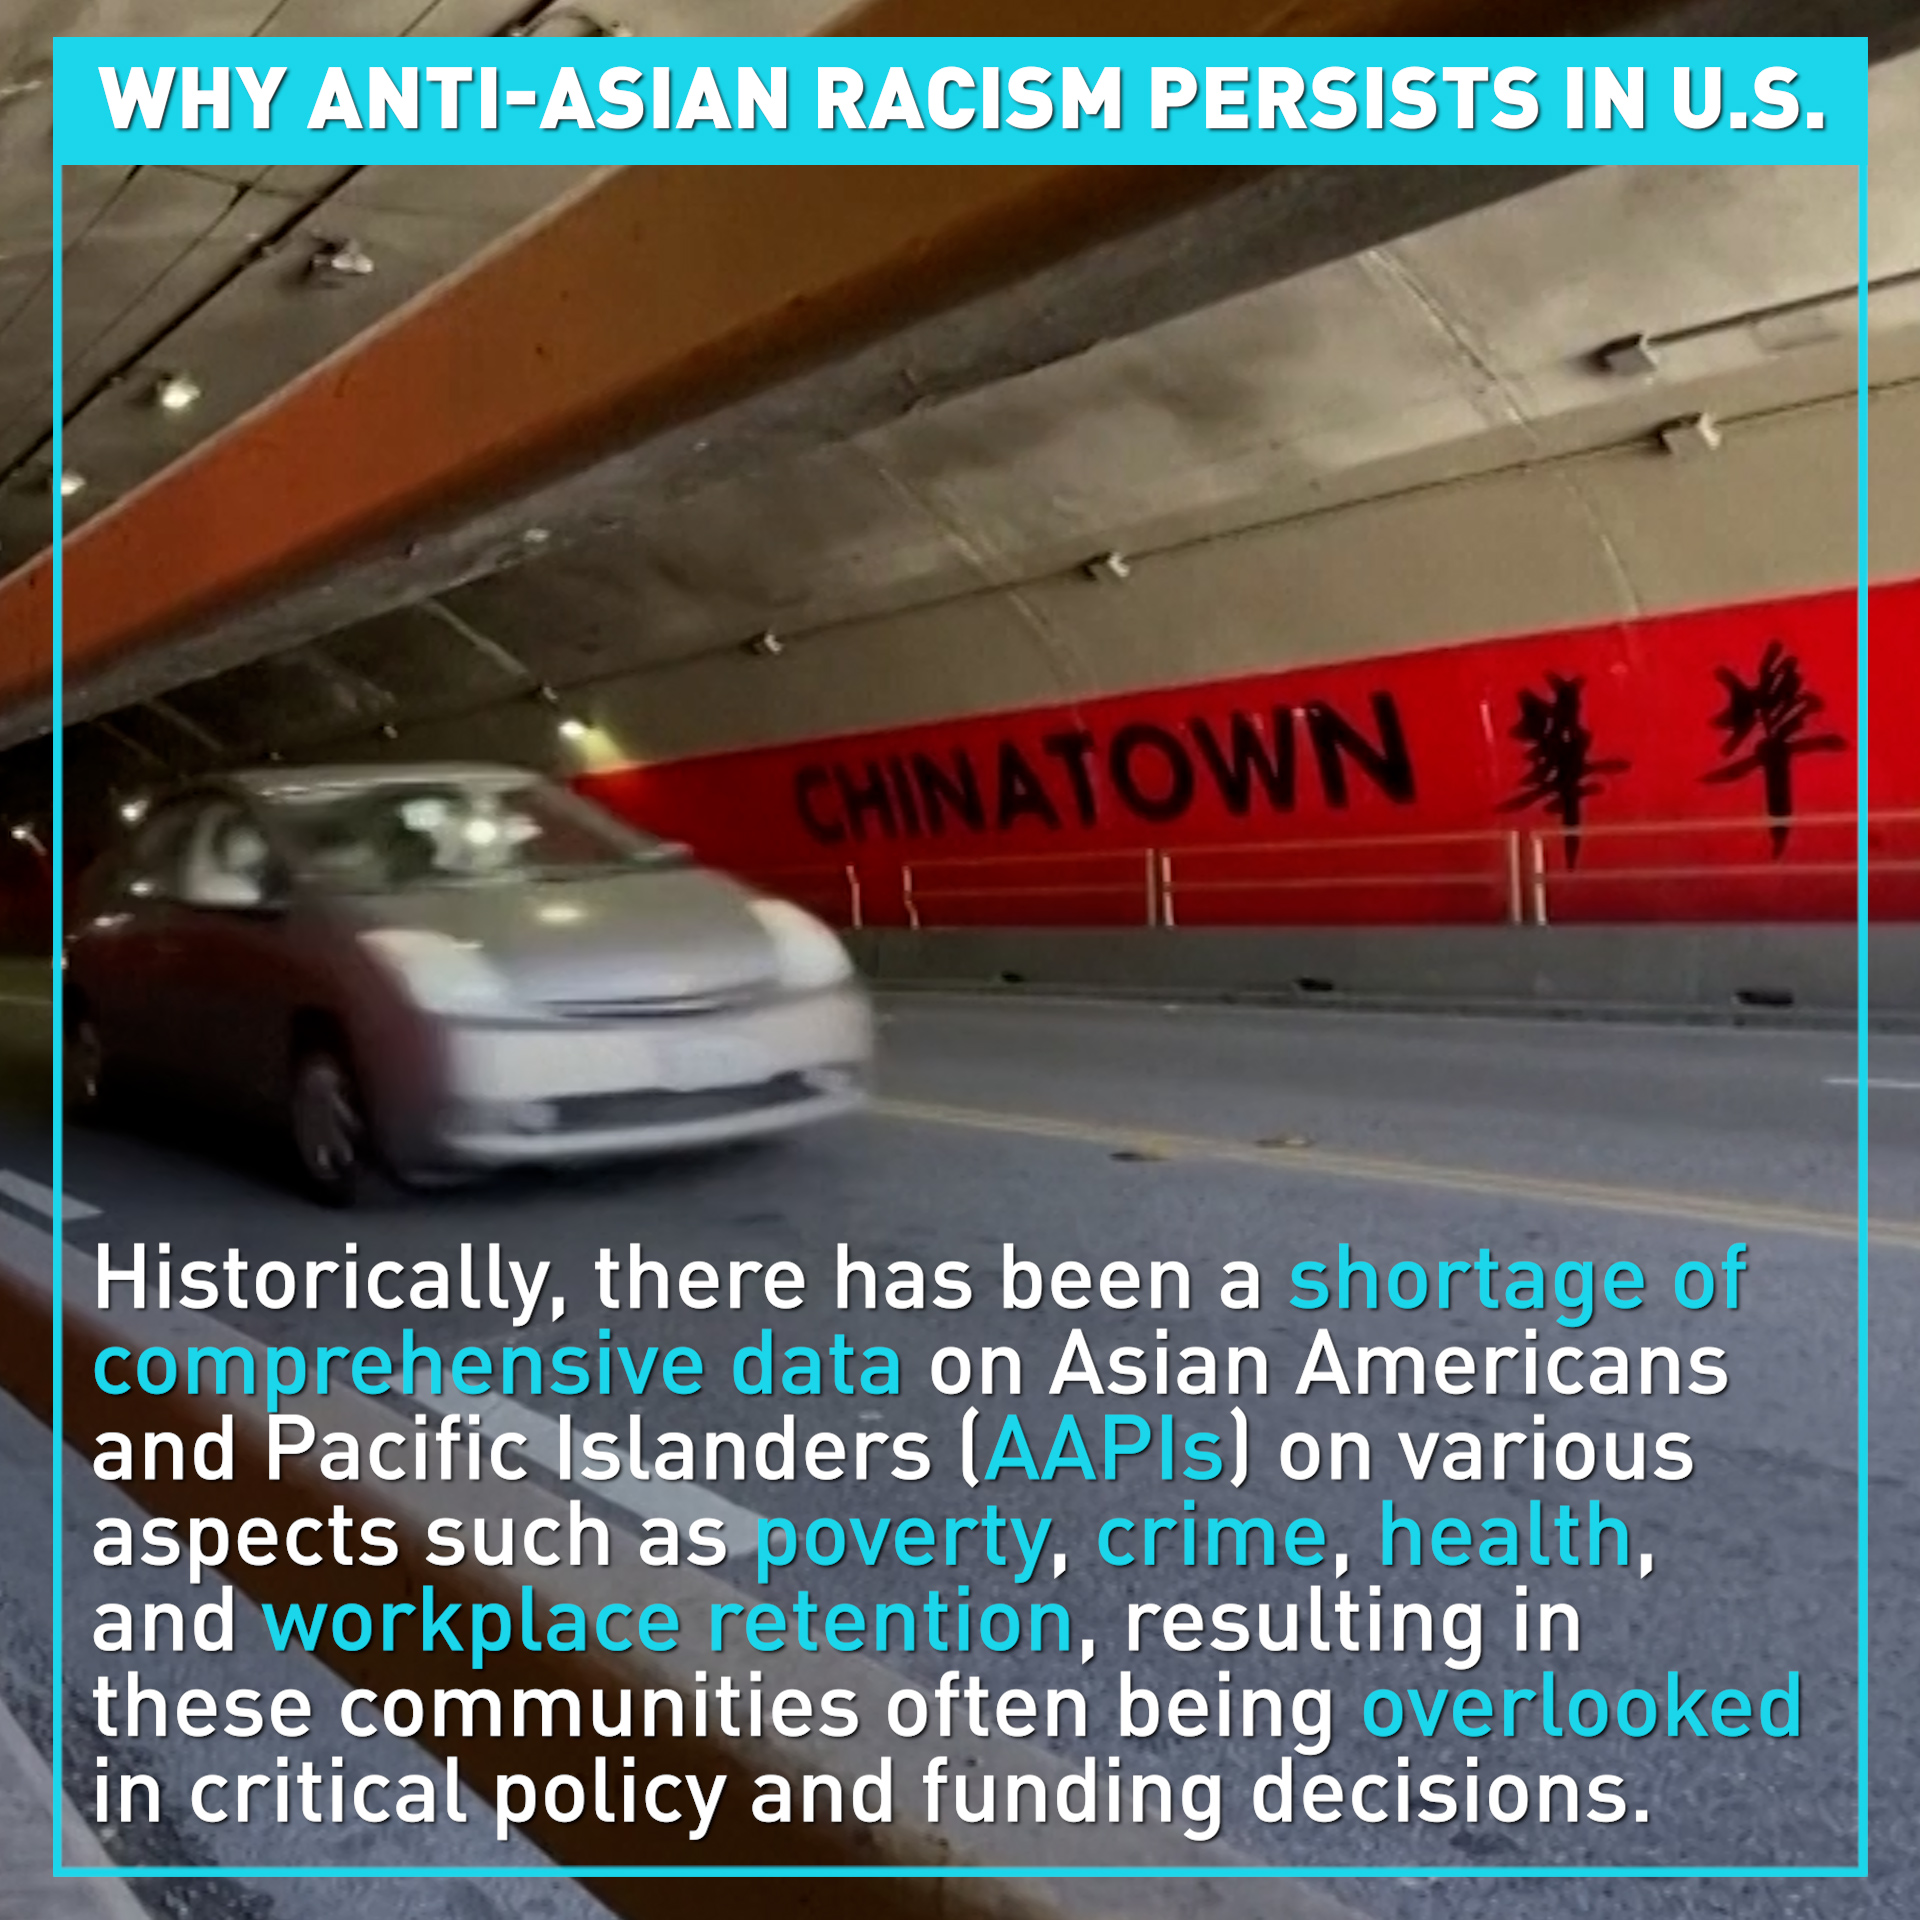 Addressing Anti-Asian racism and inequity in the U.S.